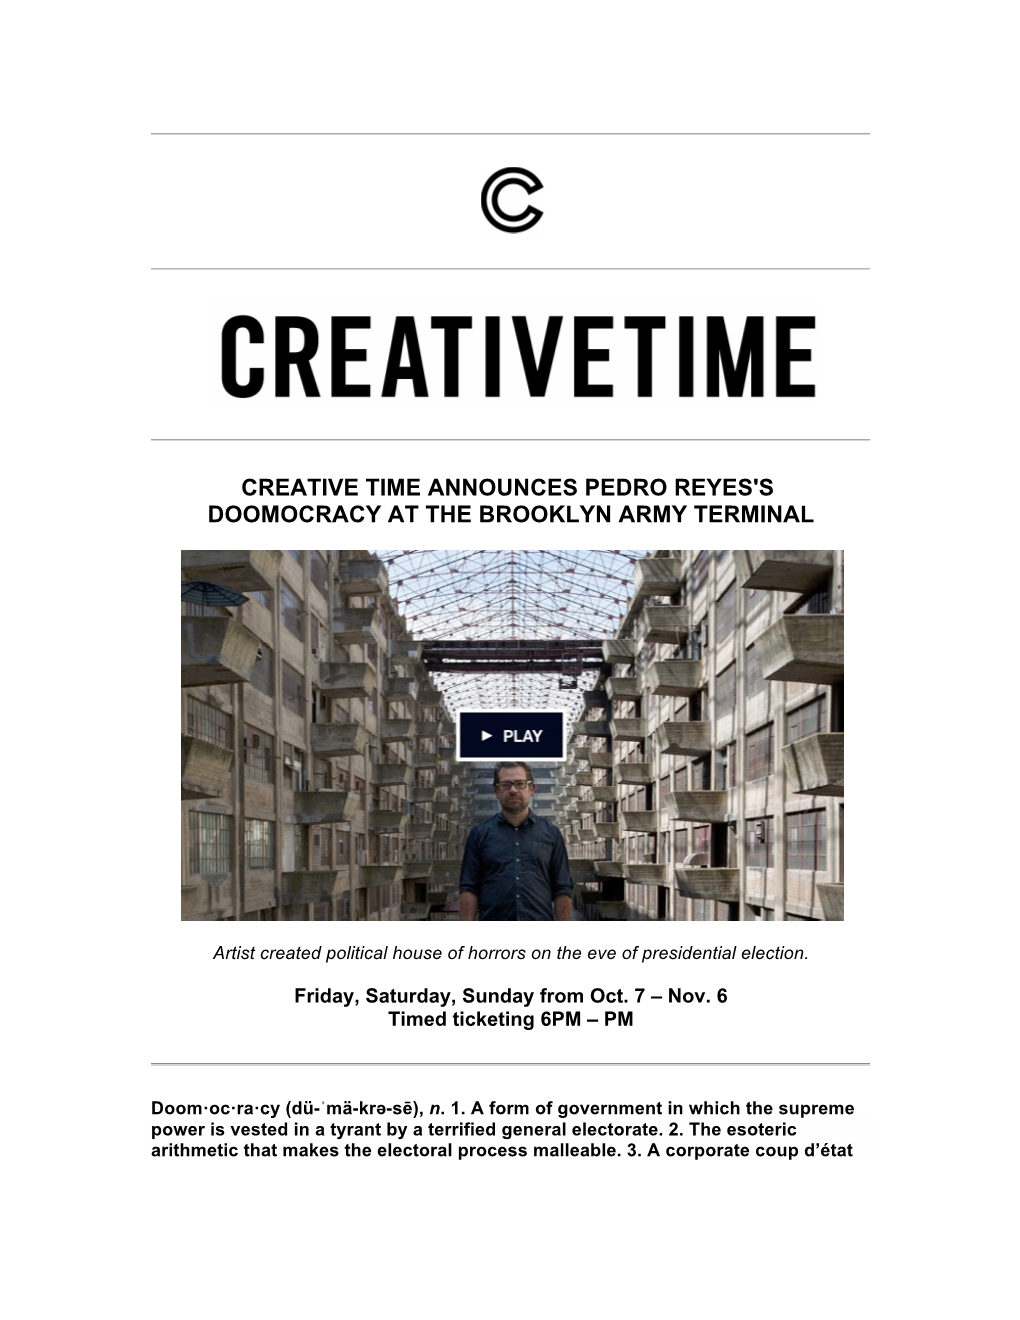 Creative Time Announces Pedro Reyes's Doomocracy at the Brooklyn Army Terminal